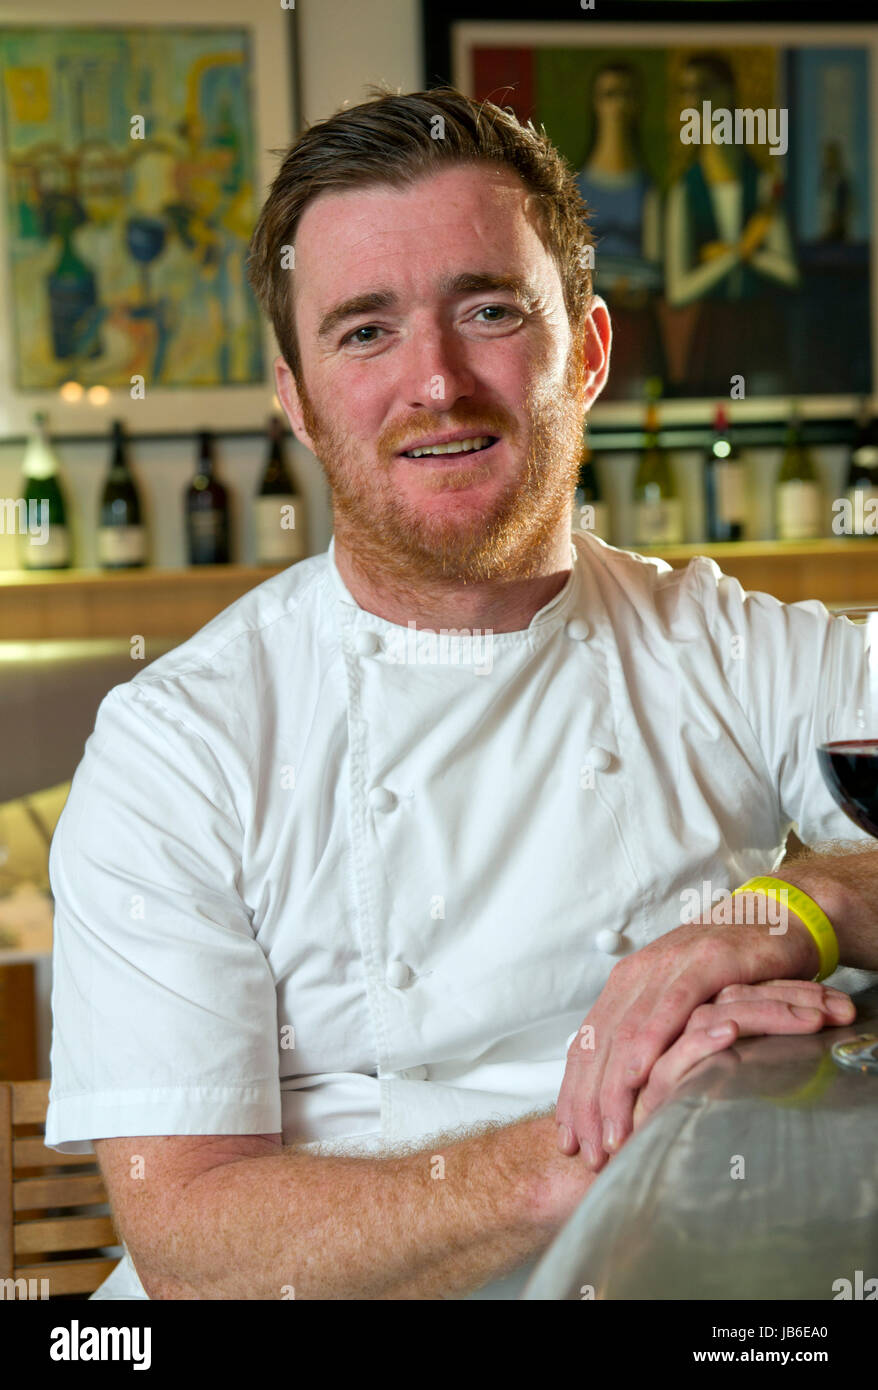 Chef Jack Stein, son of Rick Stein and who now runs the Seafood Restaurant  in Padstow, Cornwall, UK, Jack is also photographed in Padstow harbour  Stock Photo - Alamy